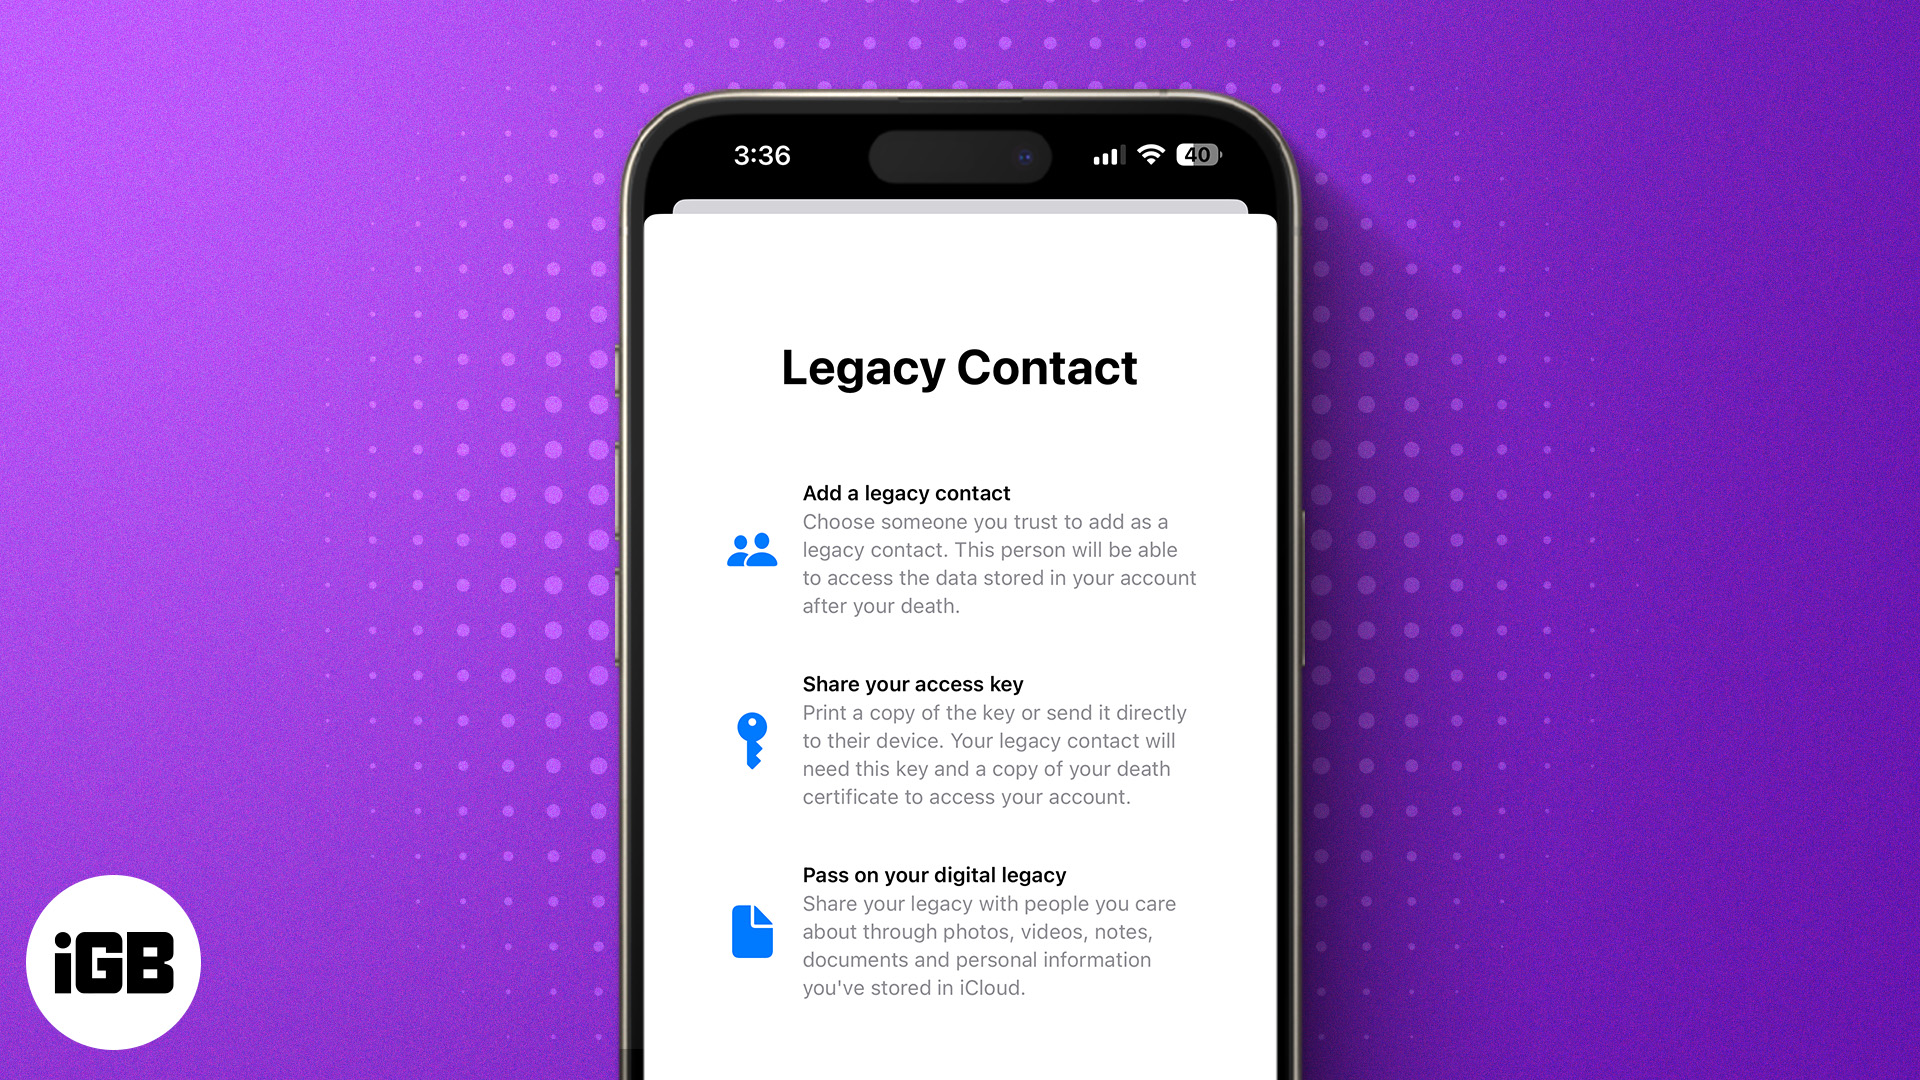 How to set up a Legacy Contact for Apple ID on iPhone, iPad and Mac